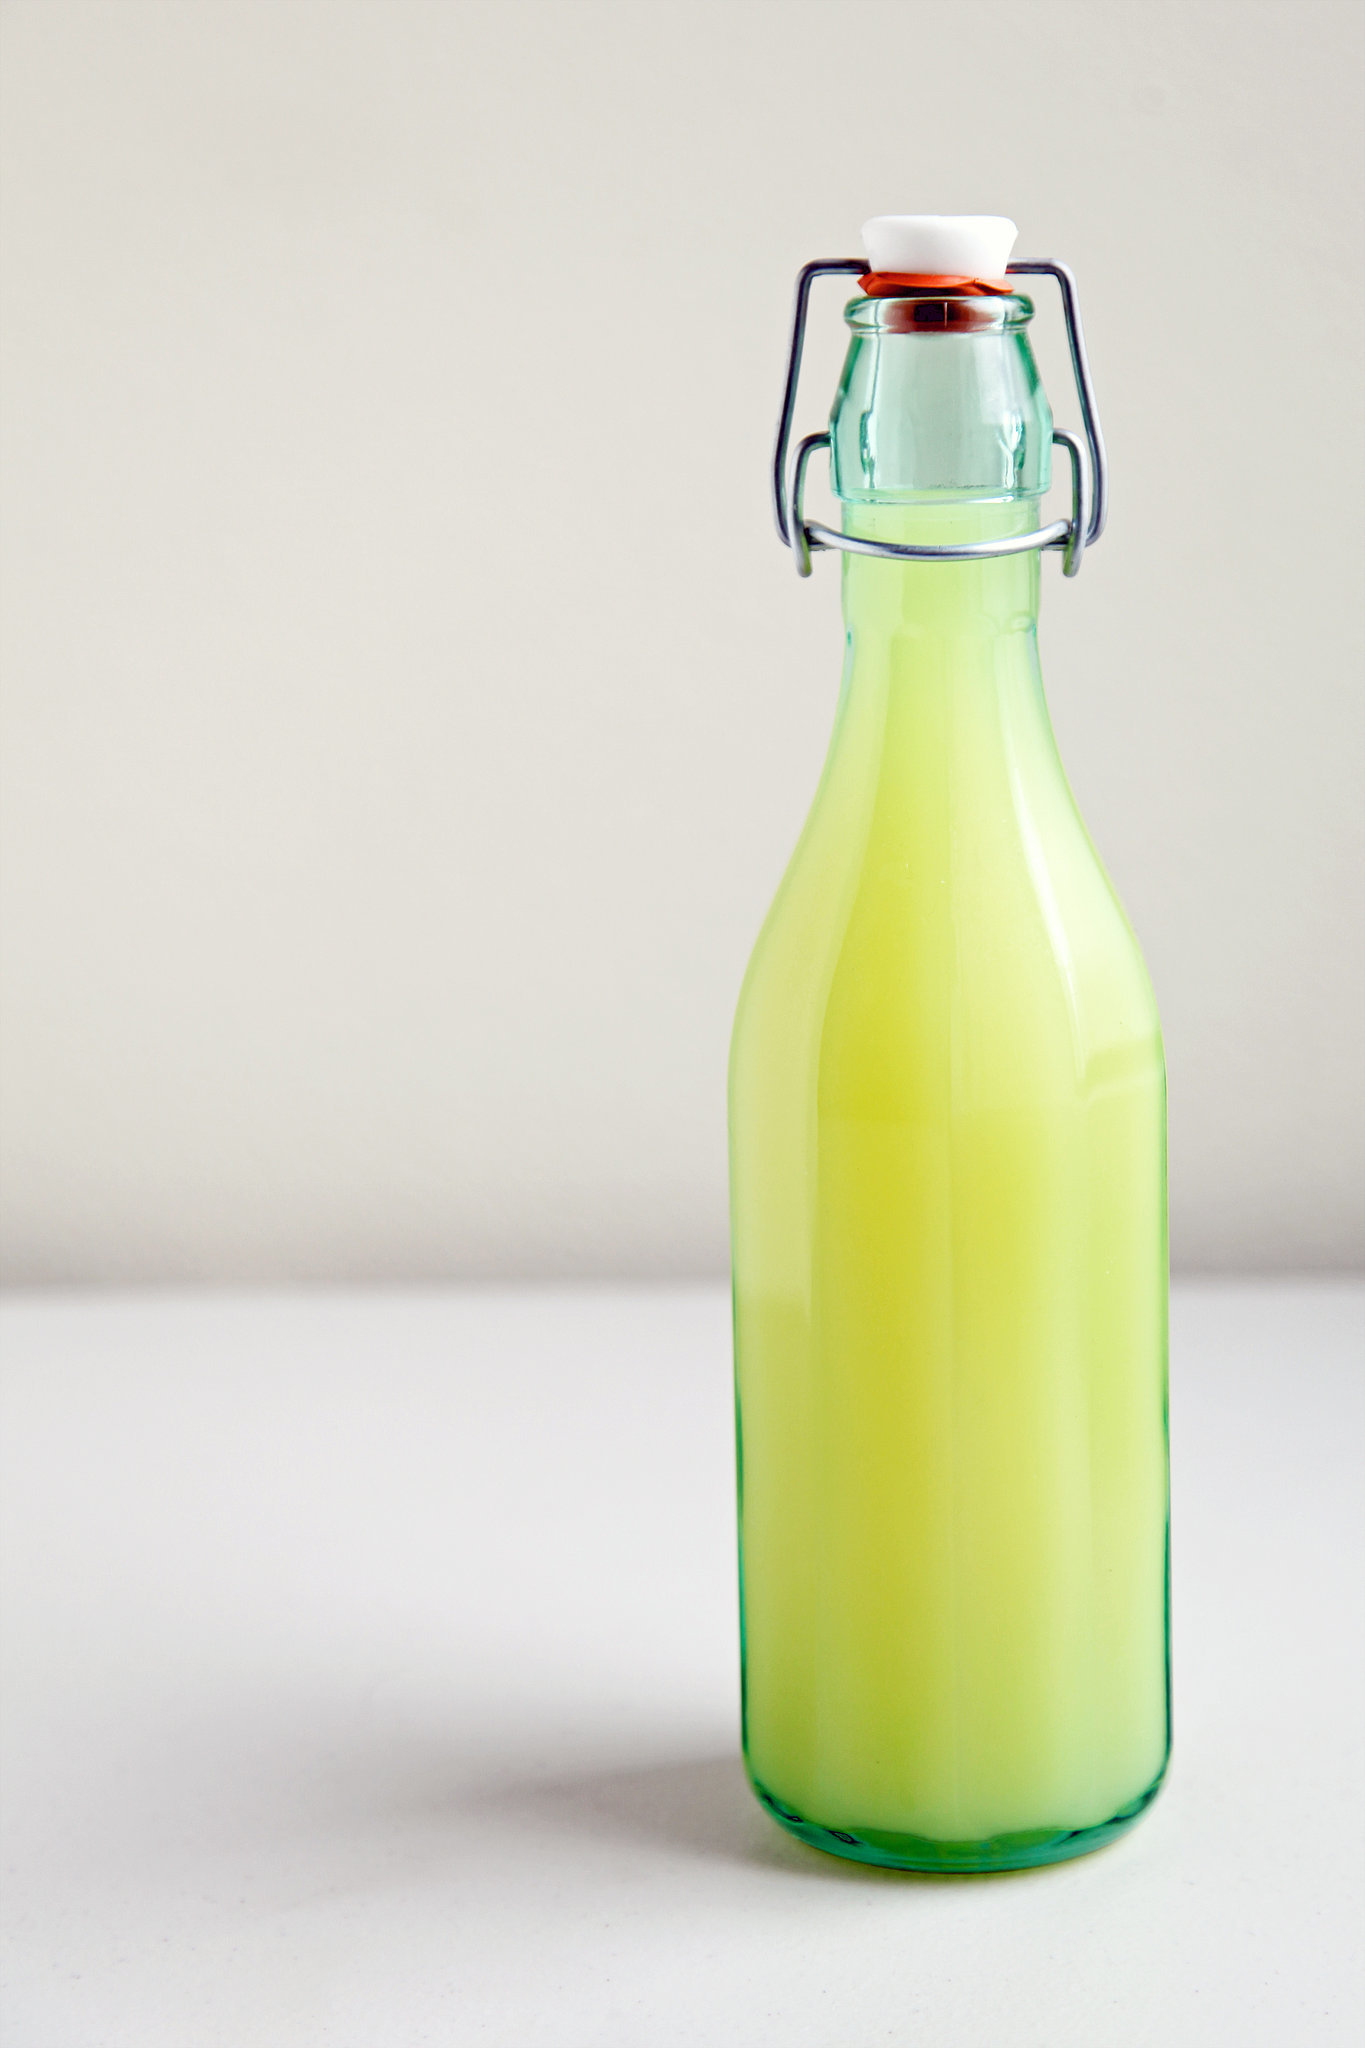 Homemade Limoncello Is a Bartender's Best Friend